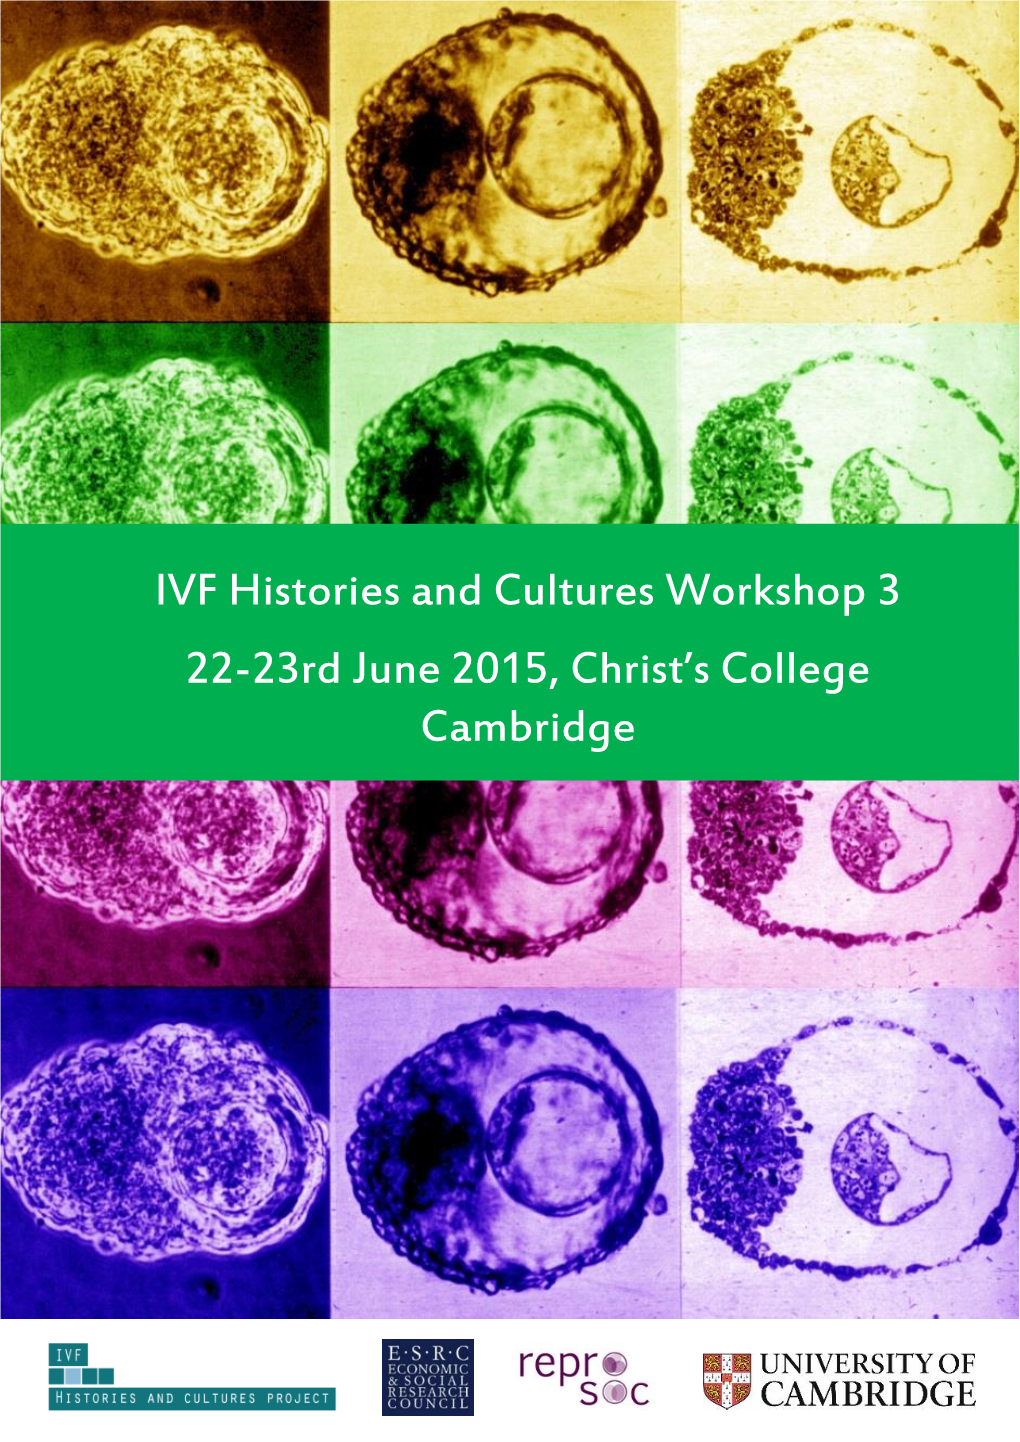 IVF Histories and Cultures Workshop 3 22-23Rd June 2015, Christ's